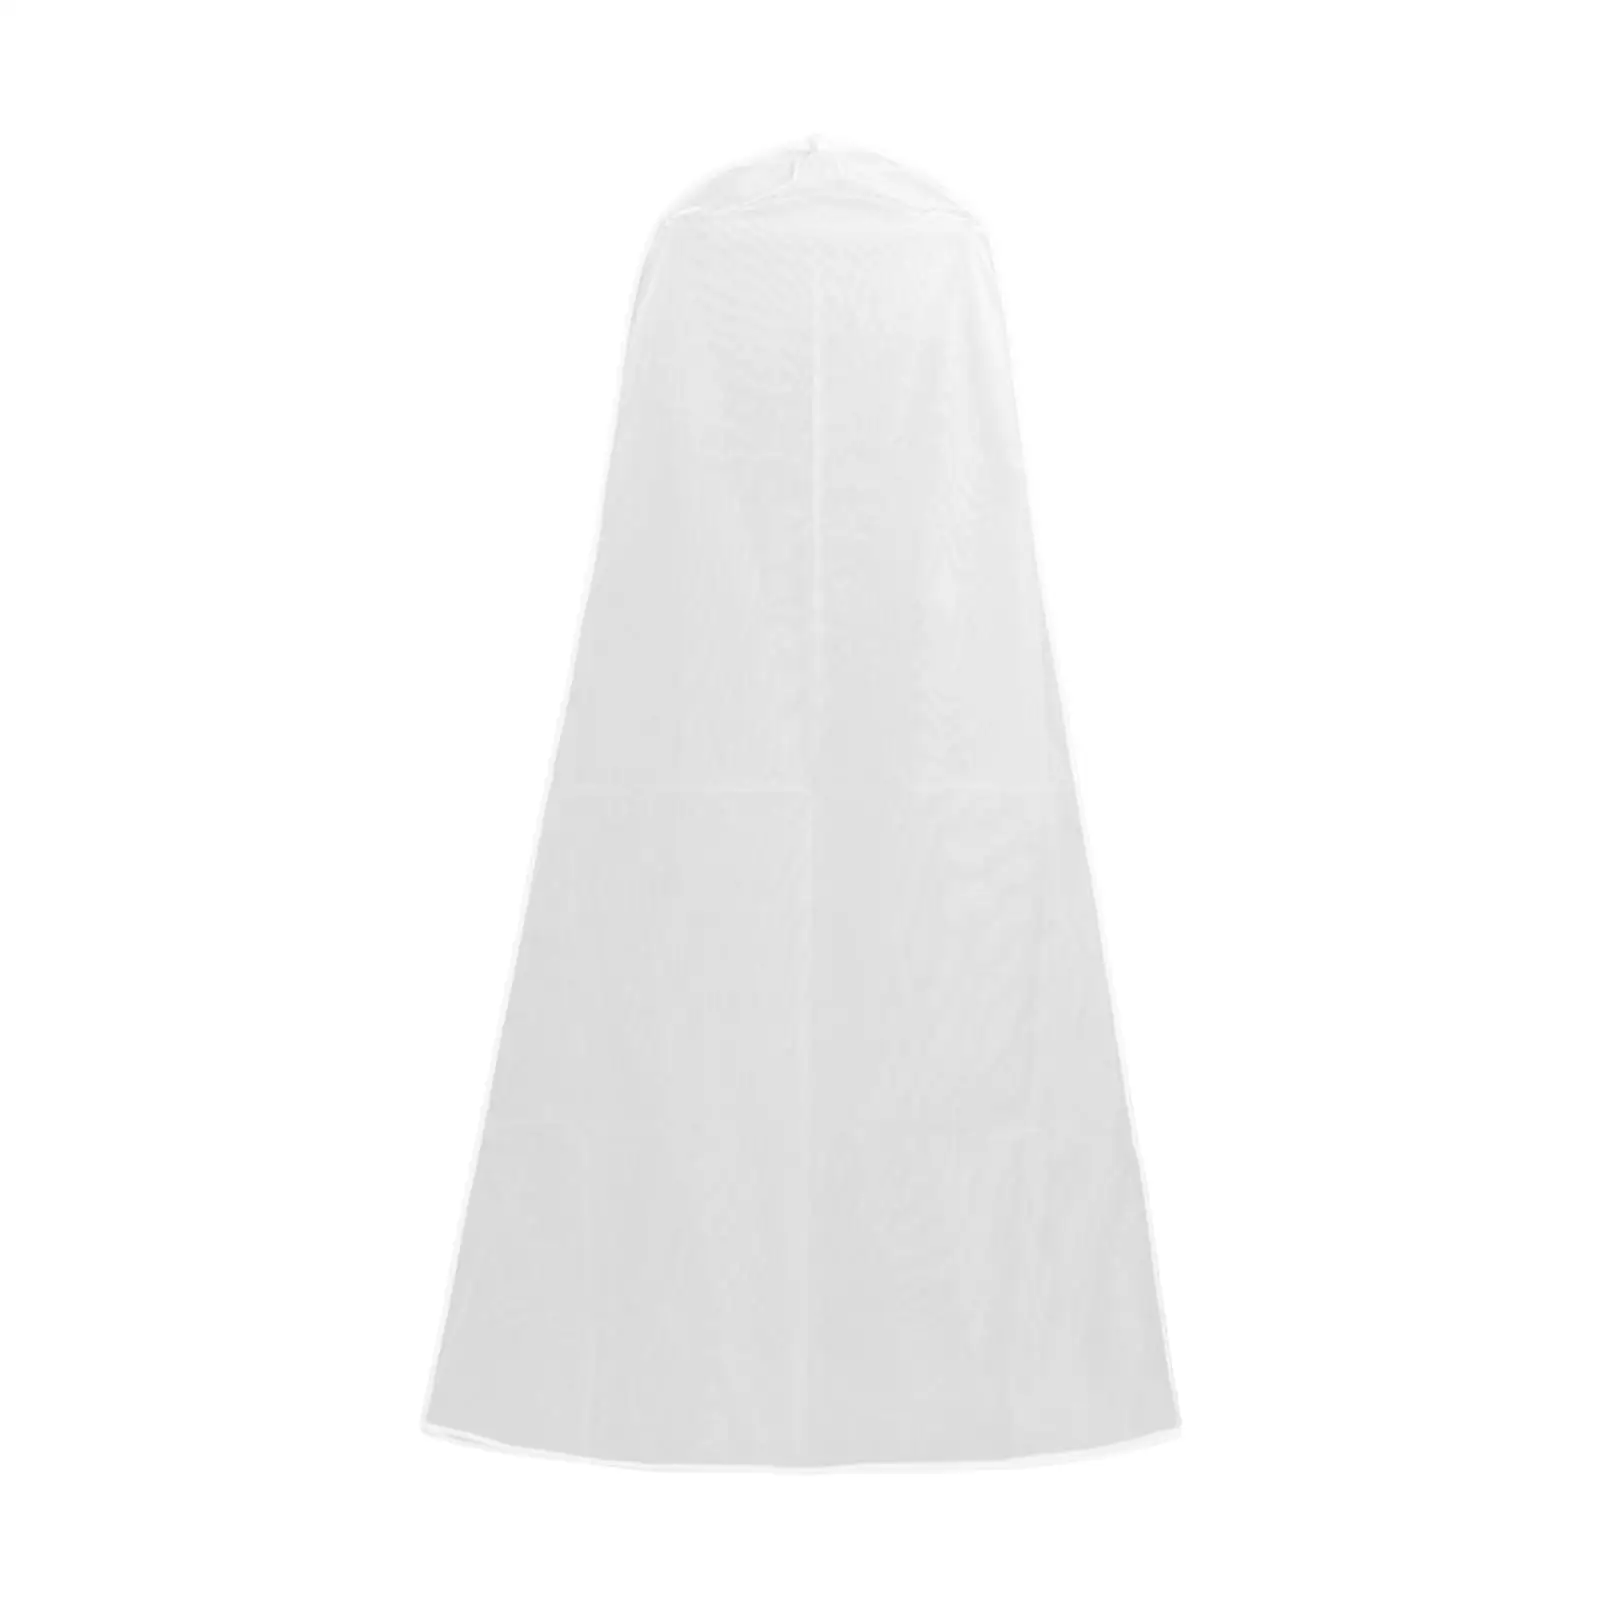 Bridal Dress Gown Cover Clothing Cover Pullover Washable Wedding Dress Garment Bag for Wardrobe Closet Storage Wedding Dress